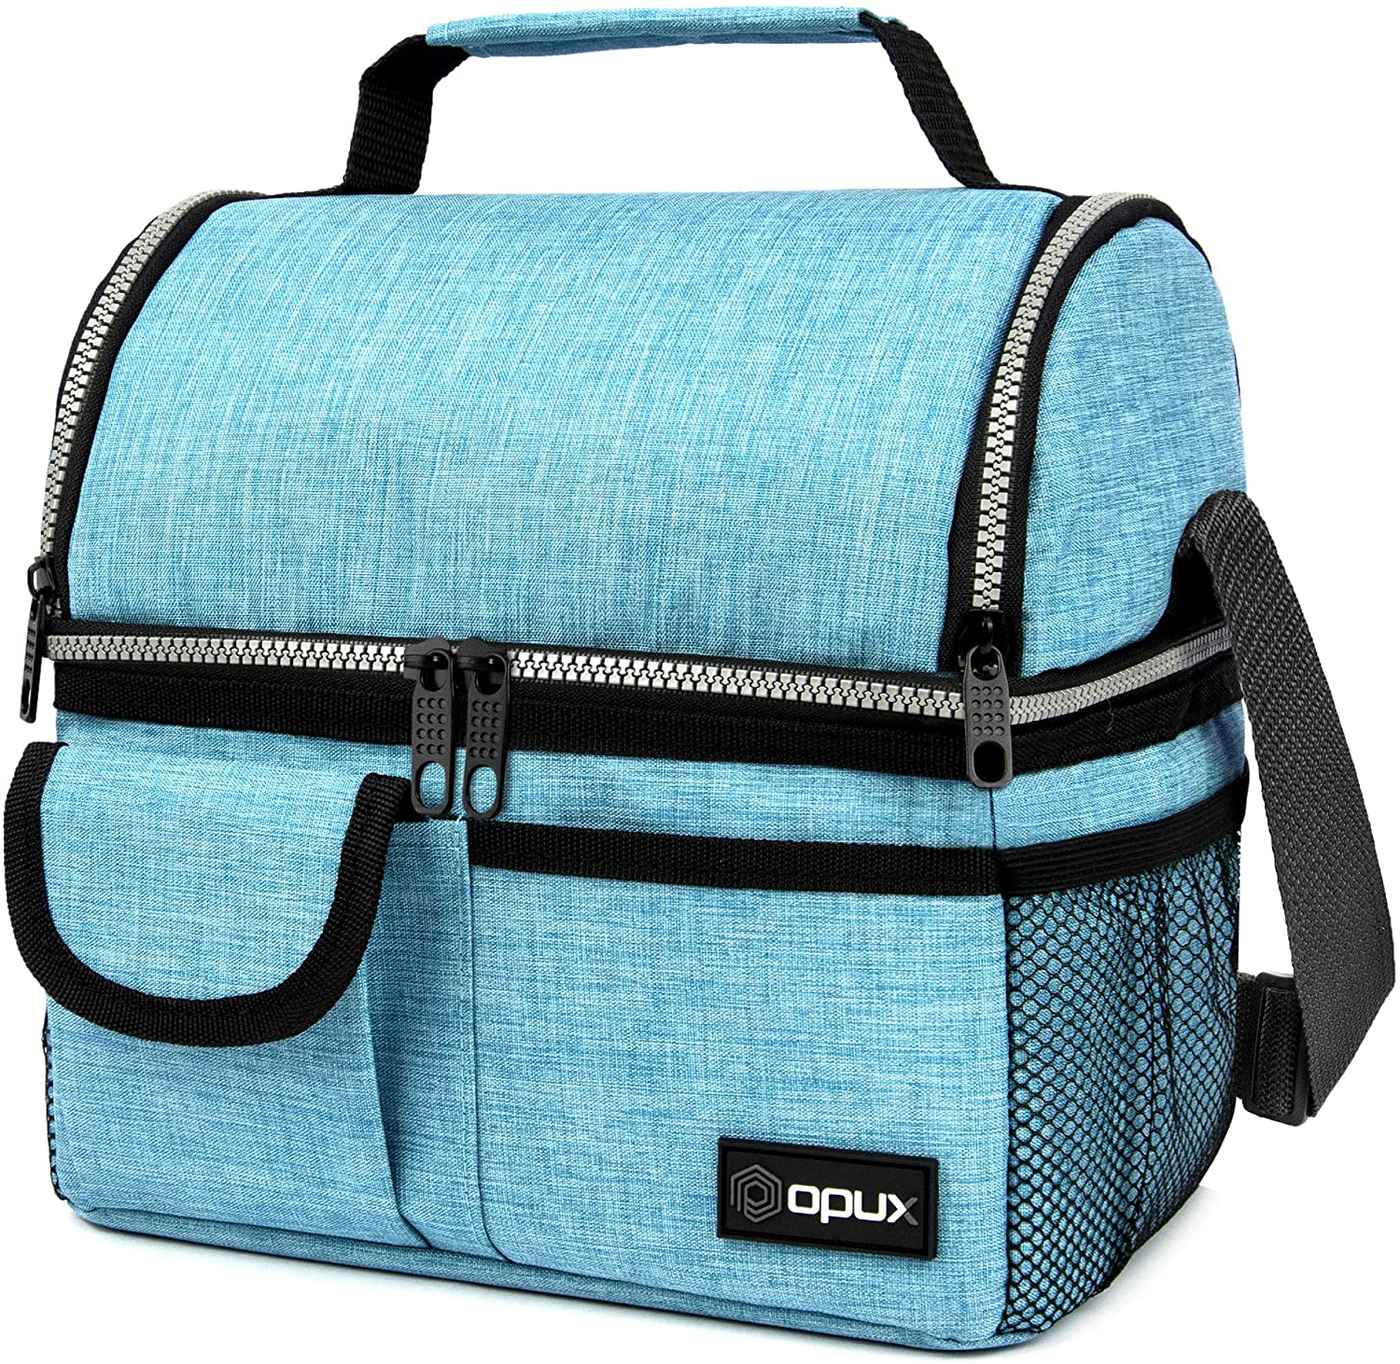 OPUX Insulated Dual Compartment Lunch Bag for Men, Women | Double Deck Reusable Lunch Pail Cooler Bag with Shoulder Strap, Soft Leakproof Liner | Large Lunch Box Tote for Work, School (Charcoal)